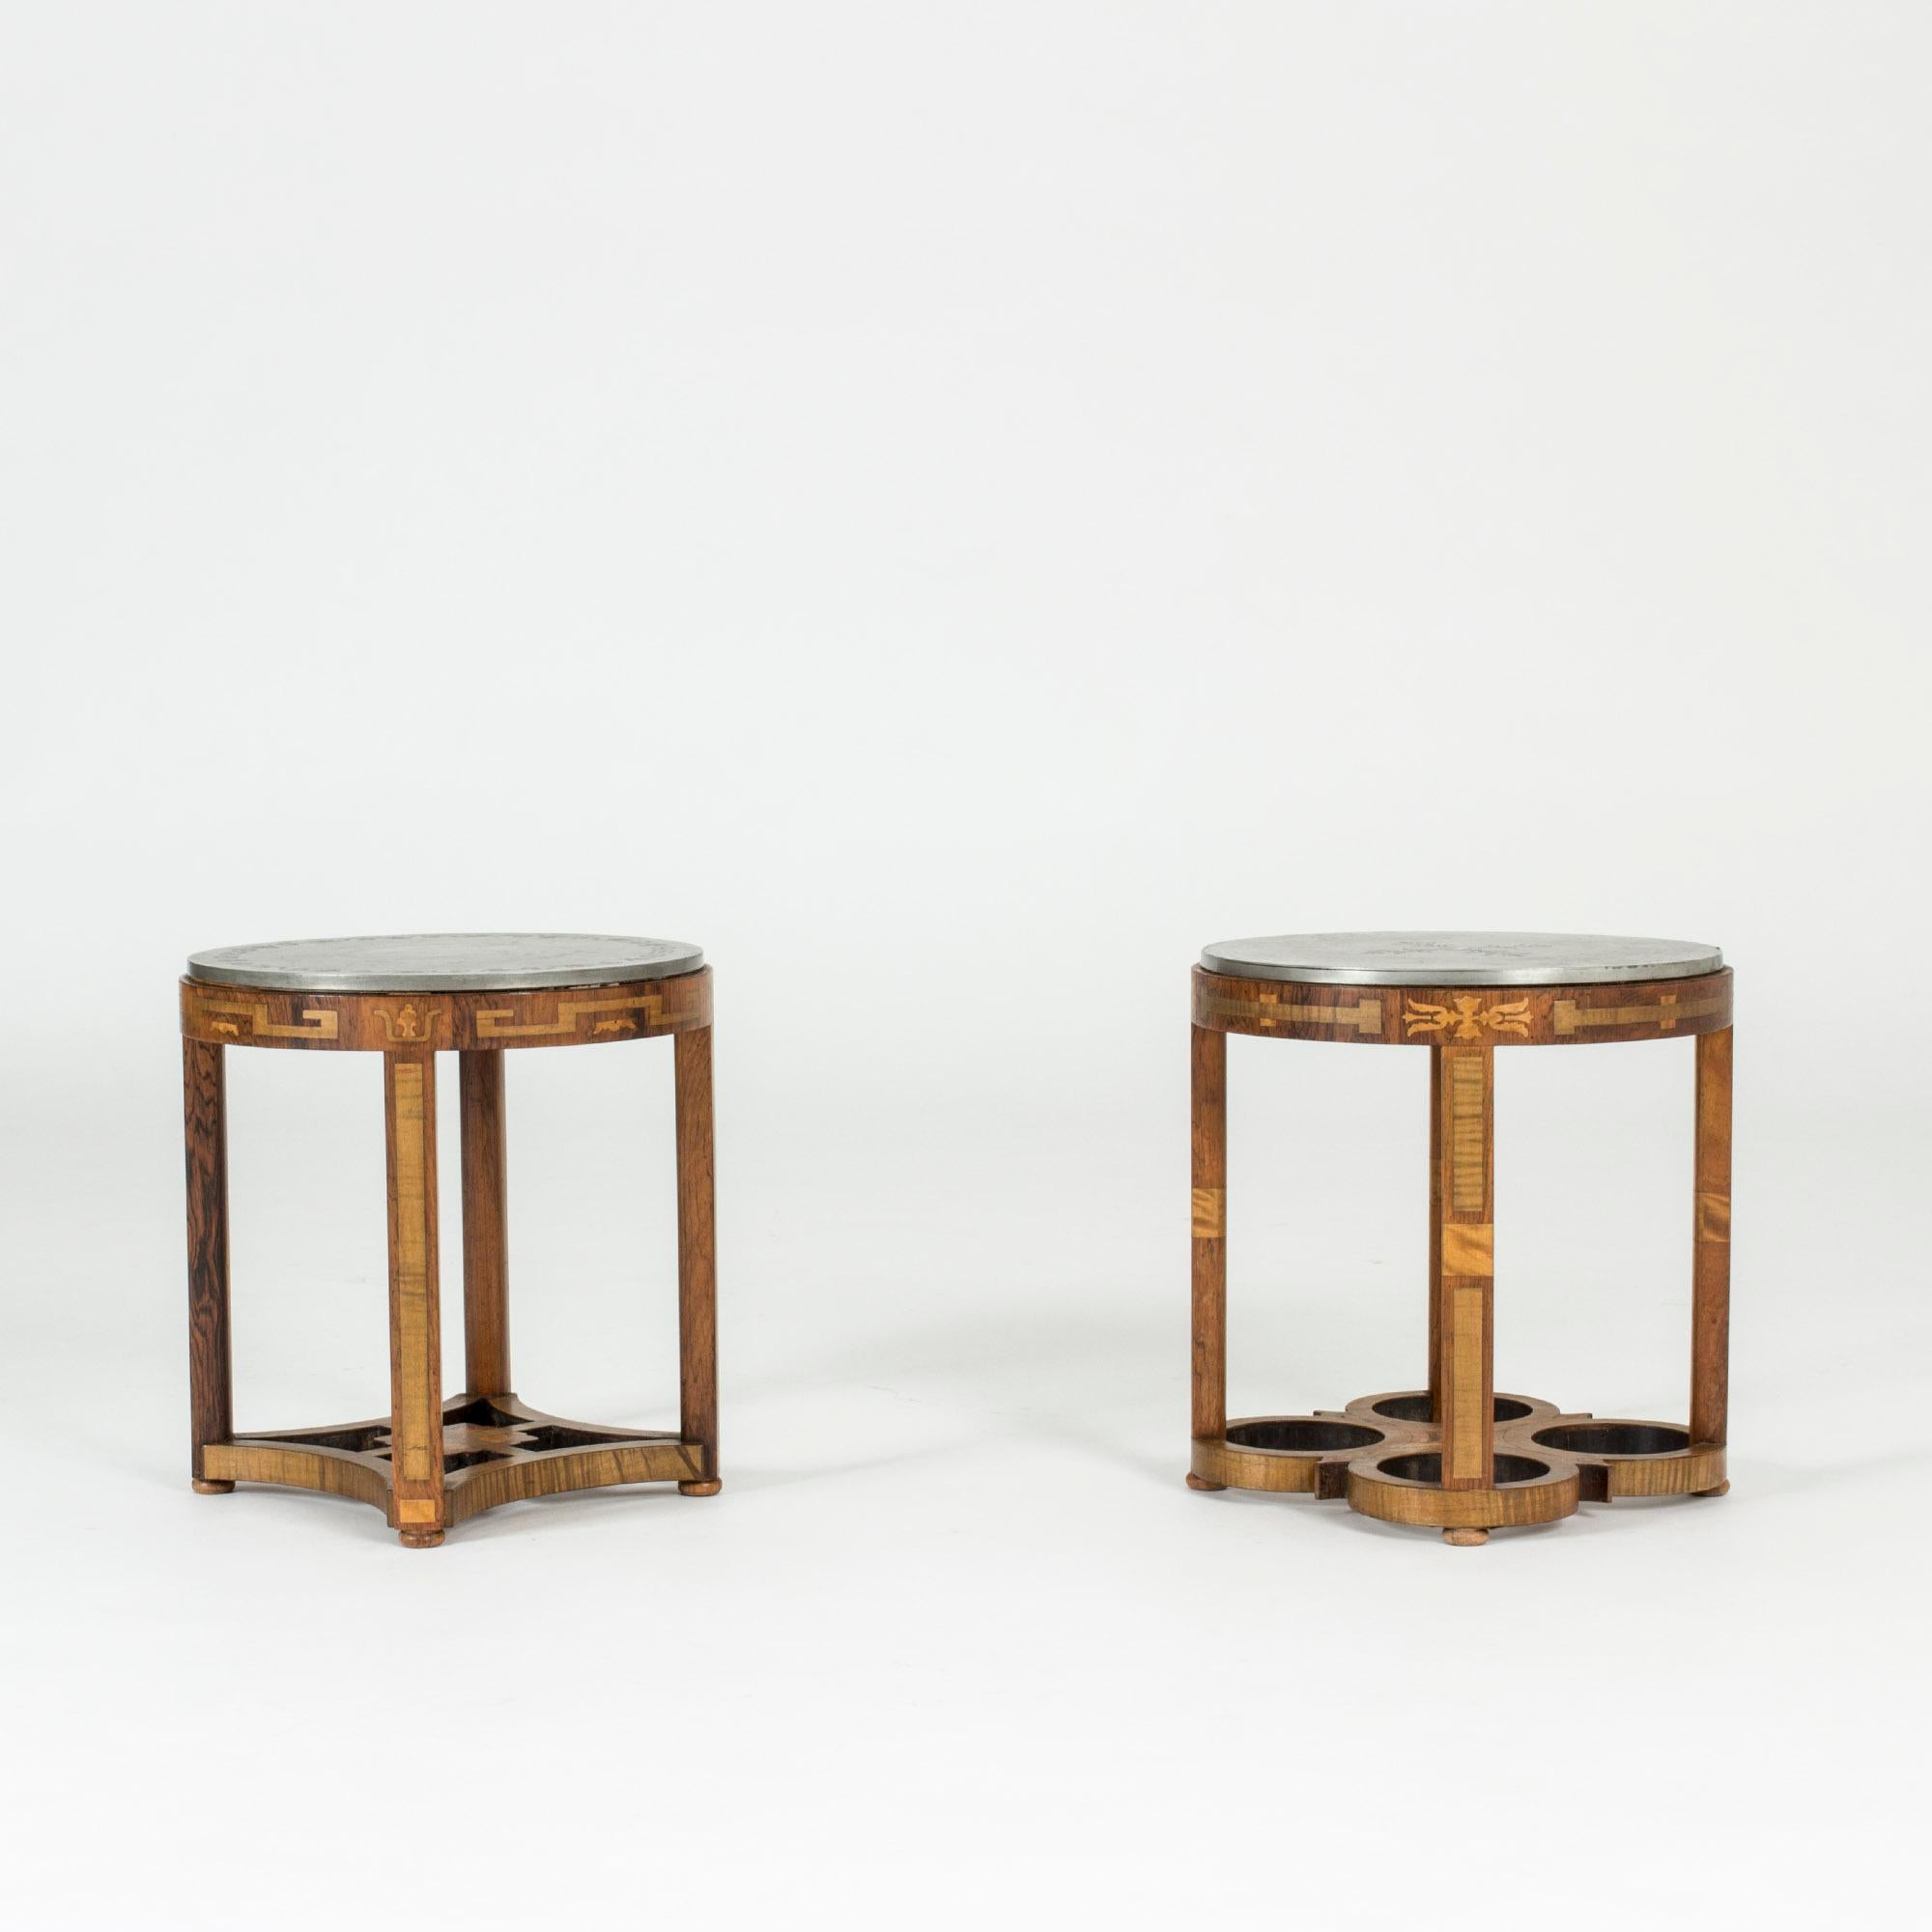 Pair of exquisite side tables from Ystad Tenn from the Swedish Grace period, made in the early 1930s. Beautiful carved wooden bases with inlays. Pewter table tops mounted on top. One with a floral decor in the middle, the other with a classic decor